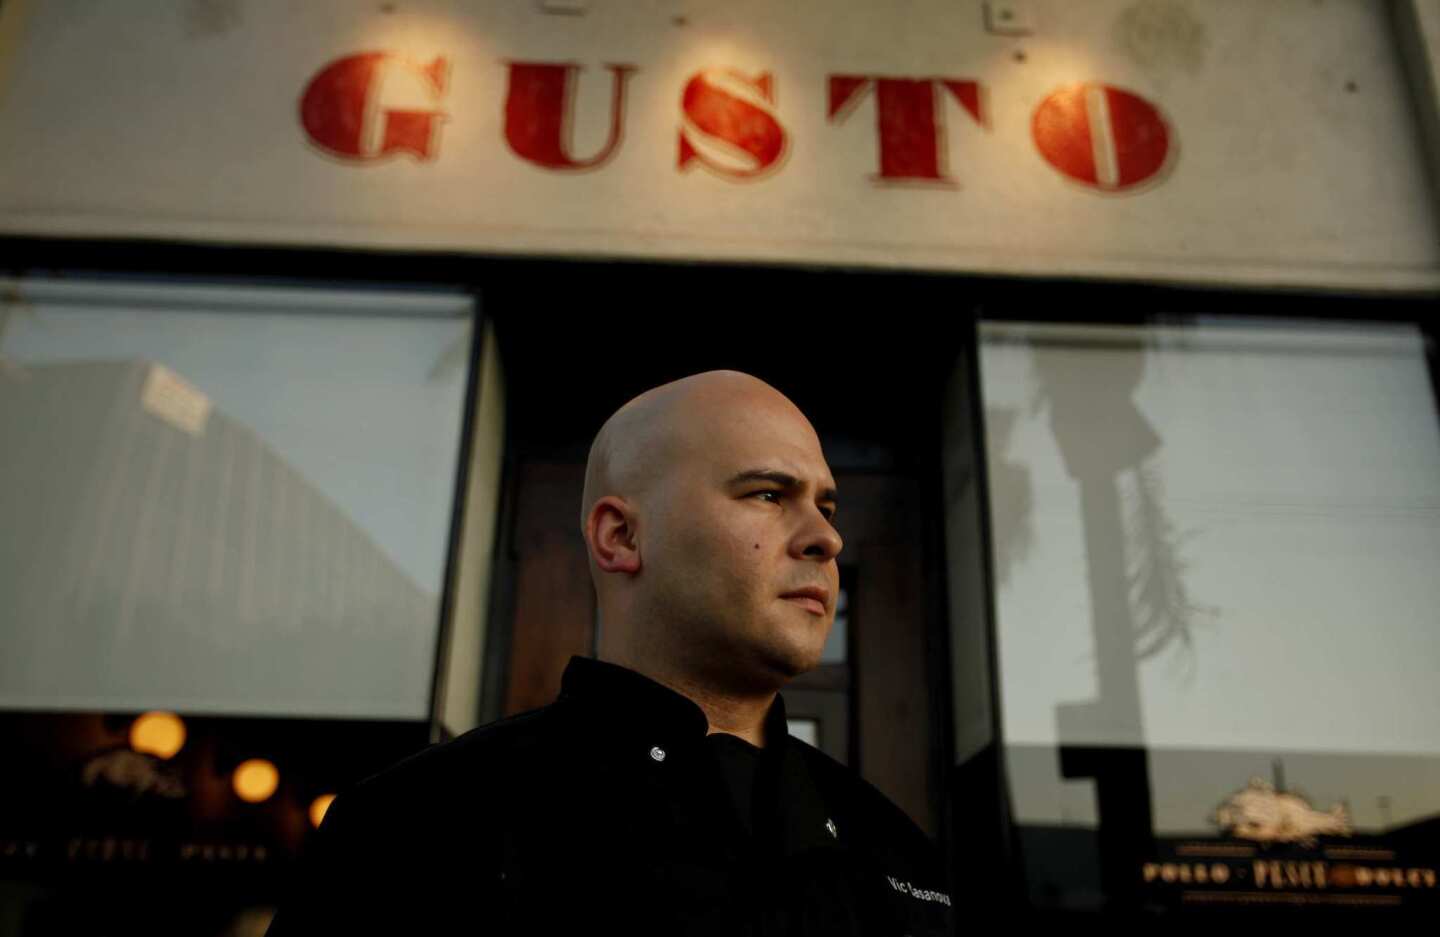 Gusto is a cozy Italian restaurant on West 3rd Street from young chef Victor Casanova, a New York native.